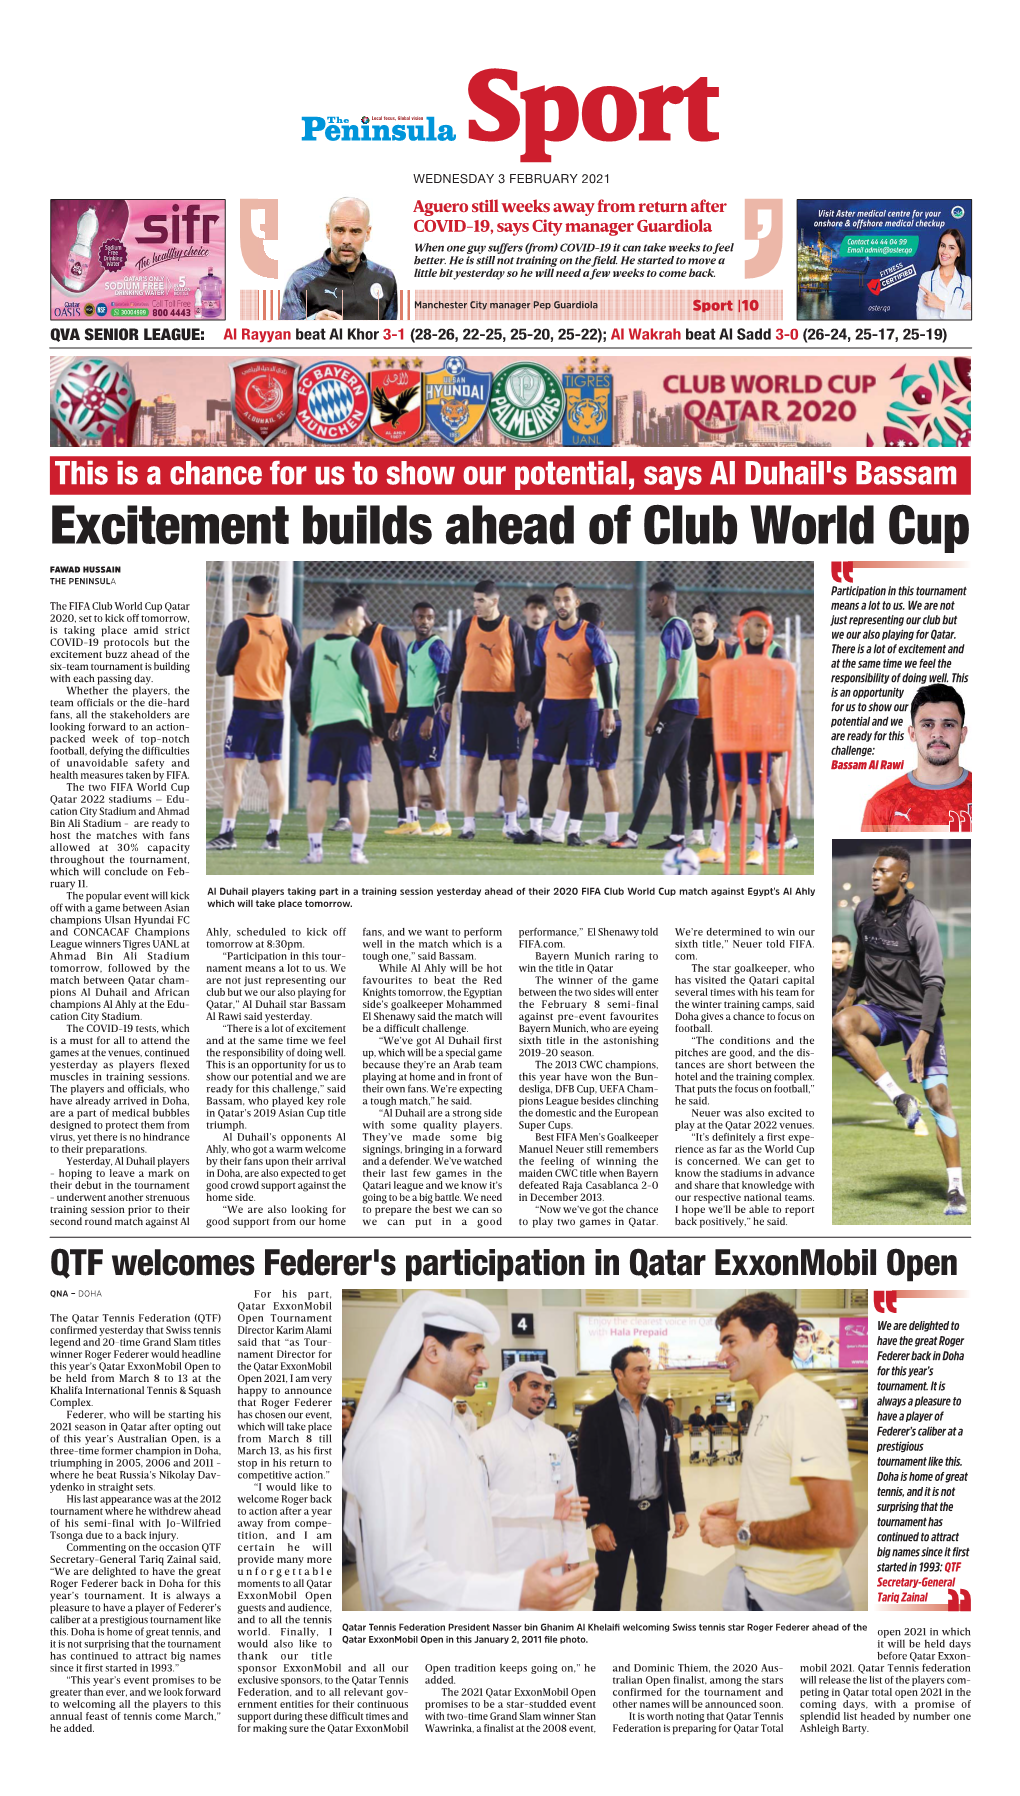 Excitement Builds Ahead of Club World Cup